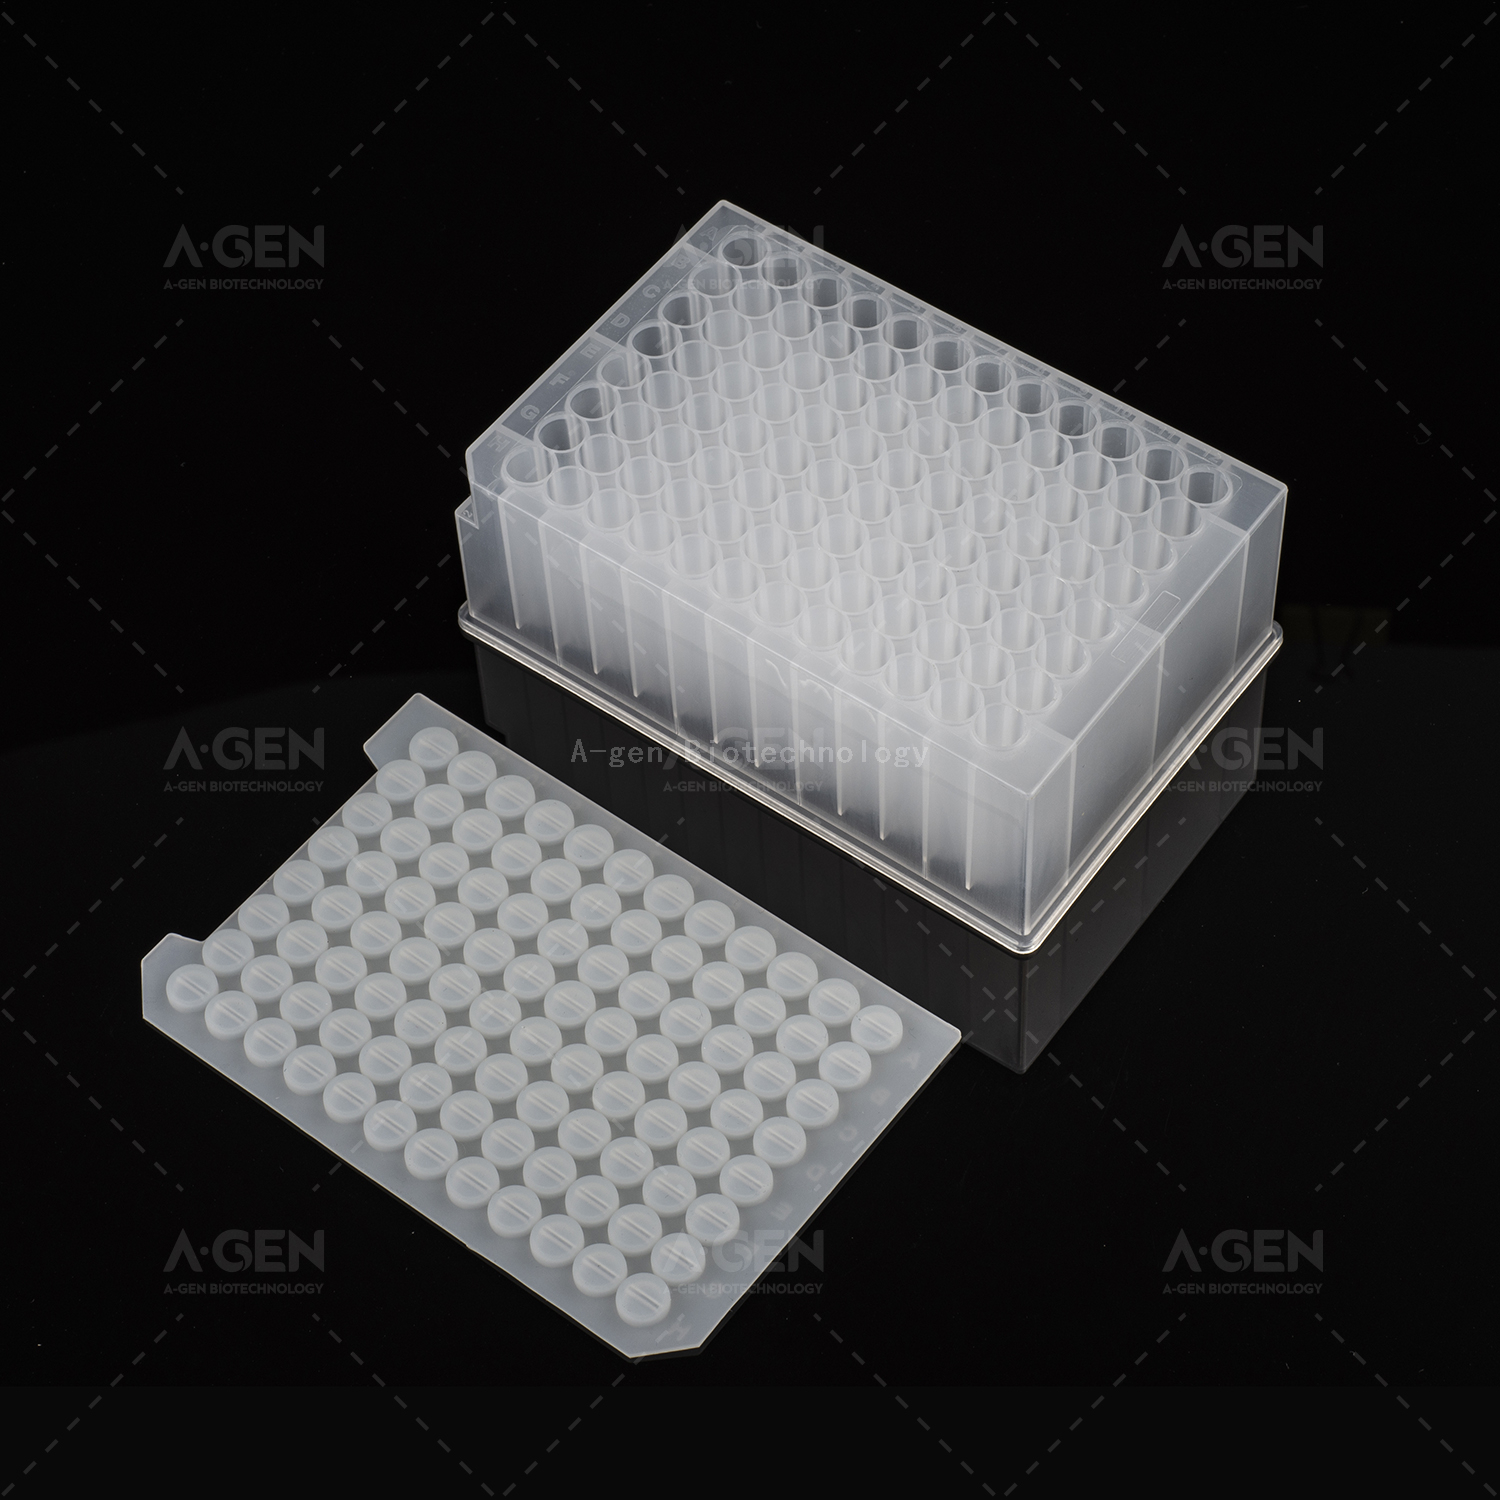 96 Round-Well Silicone Sealing Mat with "+" Cross Cut for 2.0mL 96 Round Well Plate 1.1mL